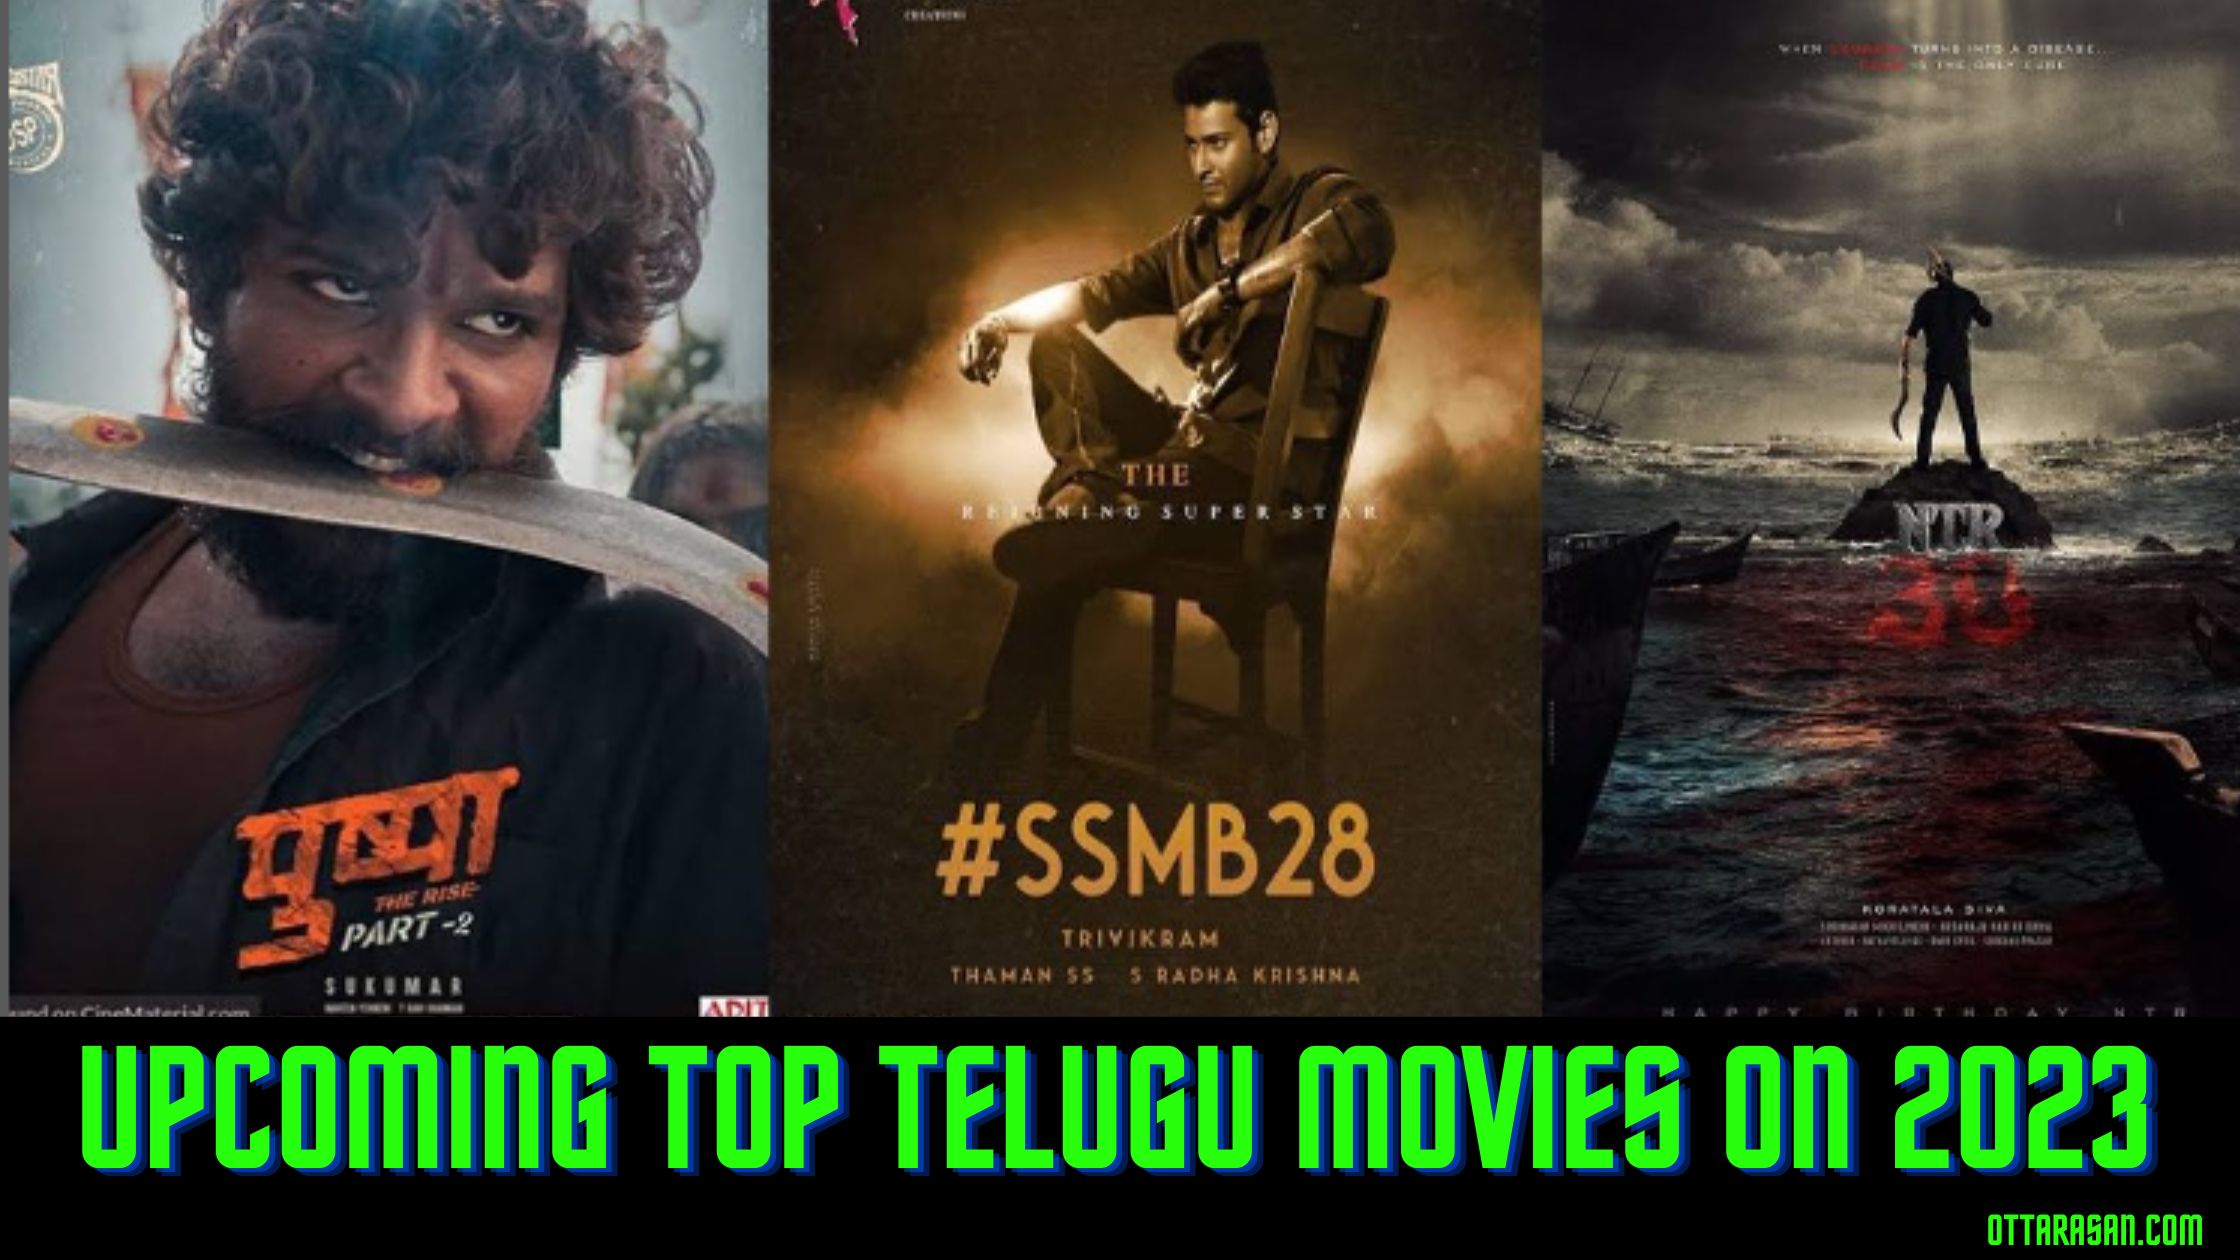 List of Upcoming Telugu Films | Famous Tollywood Movies on 2023